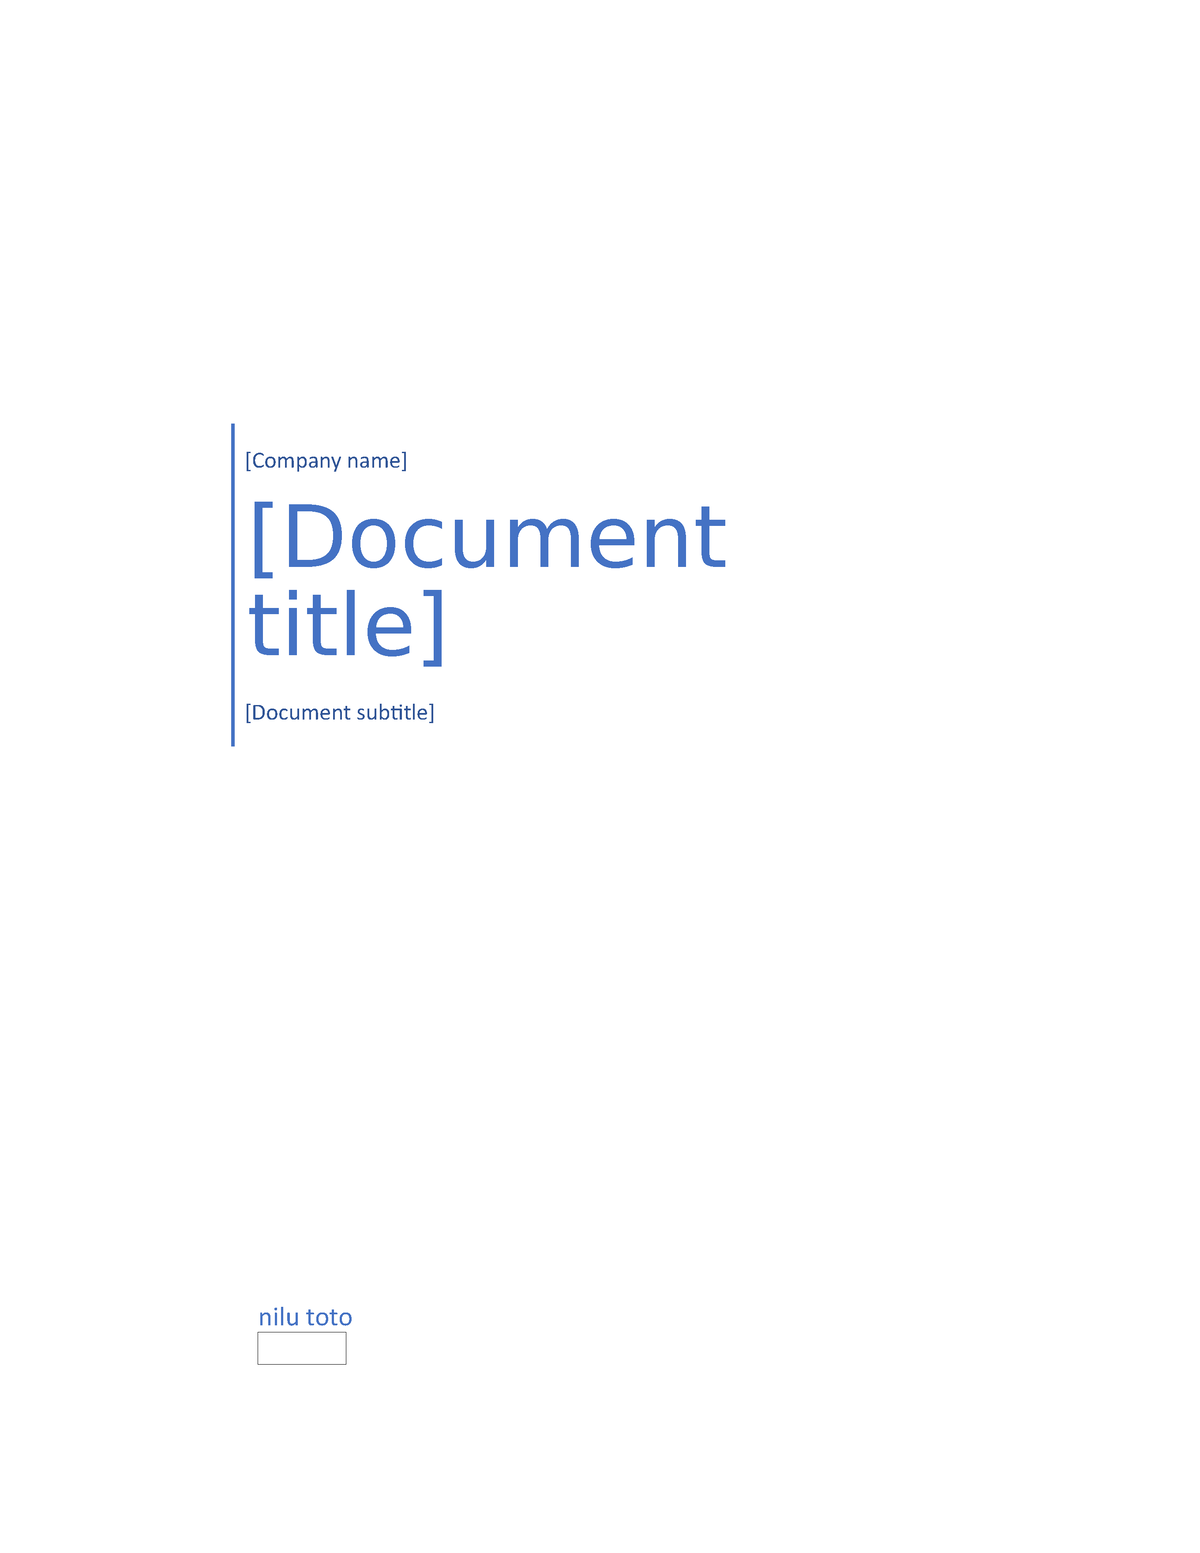 Business Palnning - nilu toto [Company name] [Document title] [Document ...